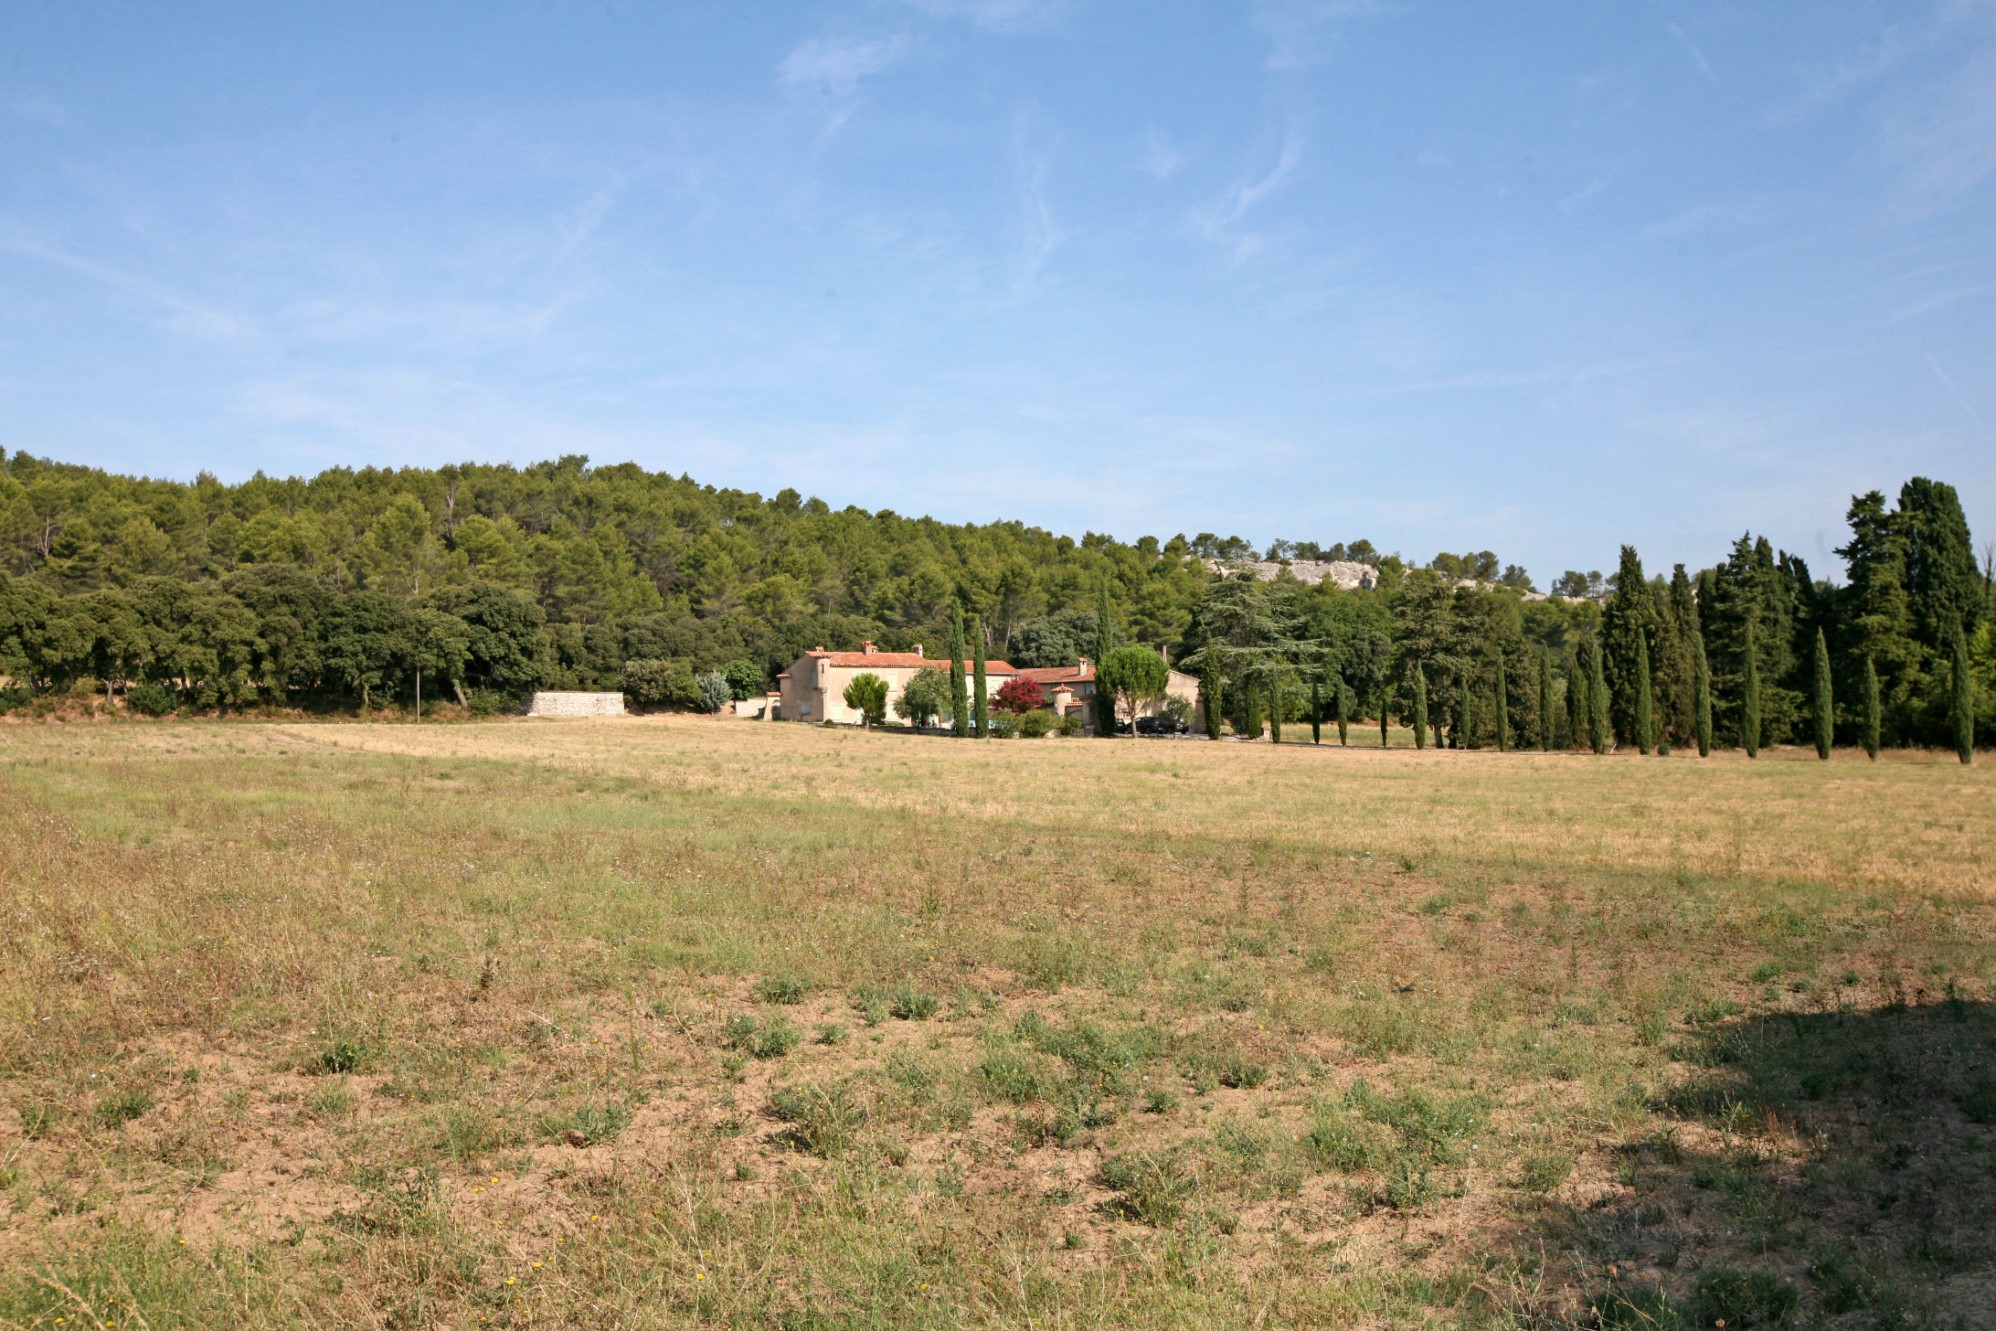 For sale, property with a Tuscany feel between Alpilles and Luberon